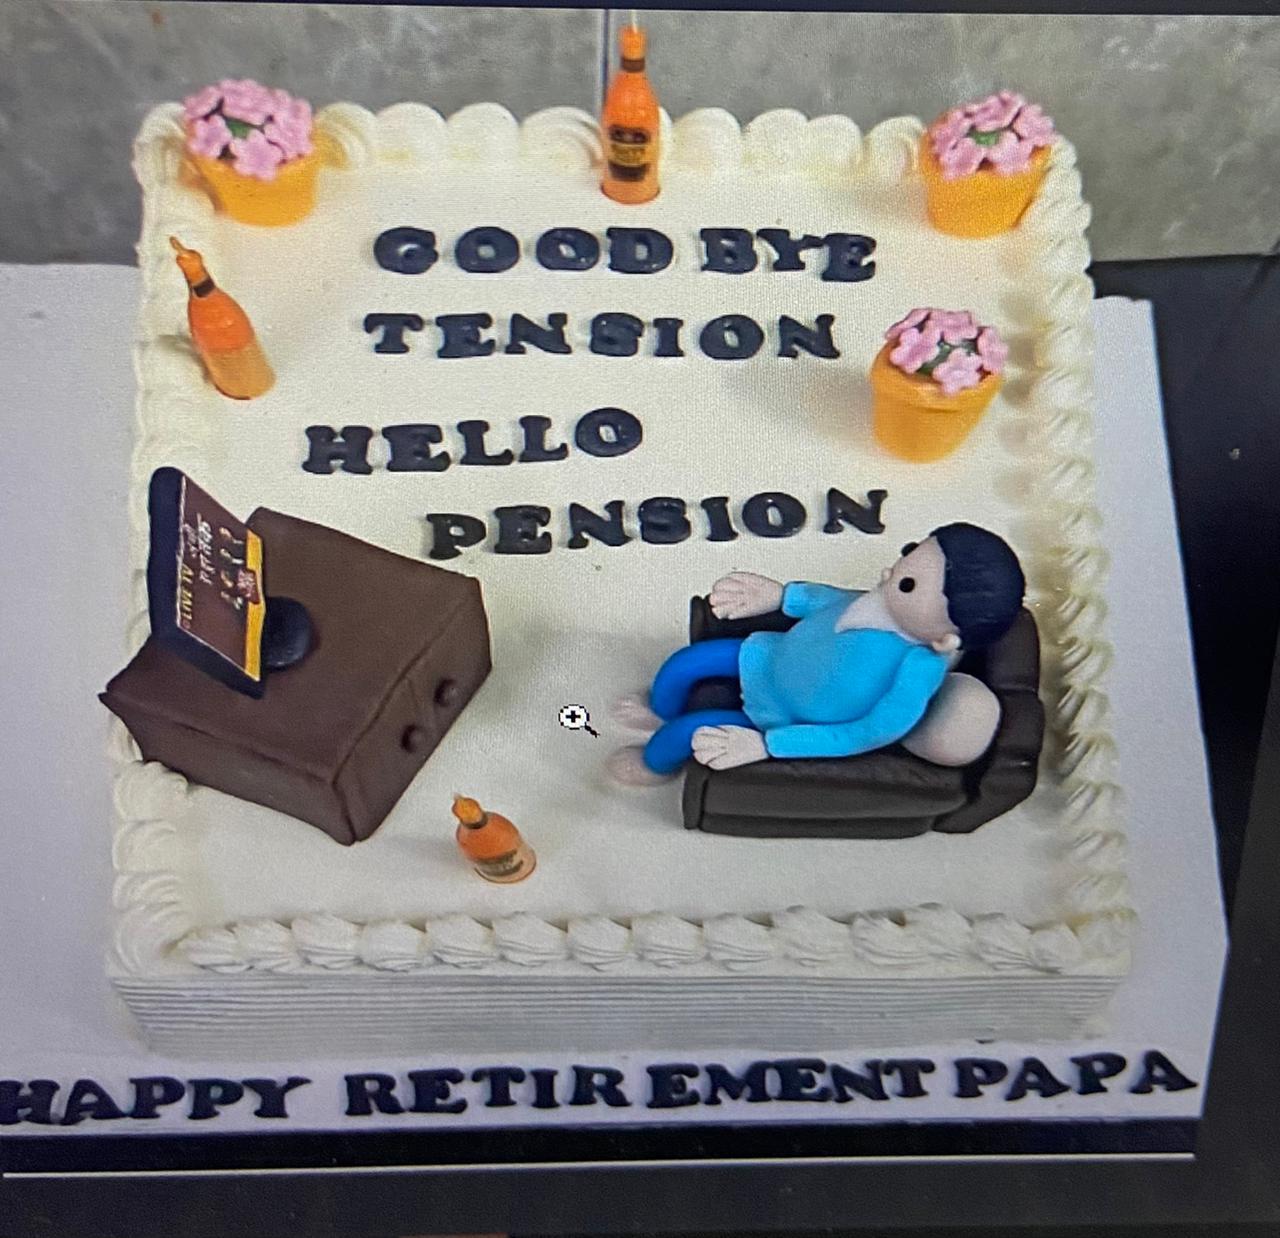 Need a cake for a retirement!? We can Help you with that! • Place orders by  PHONE•MESSAGE•EMAIL•WALK-IN • We are open today 6am to… | Instagram